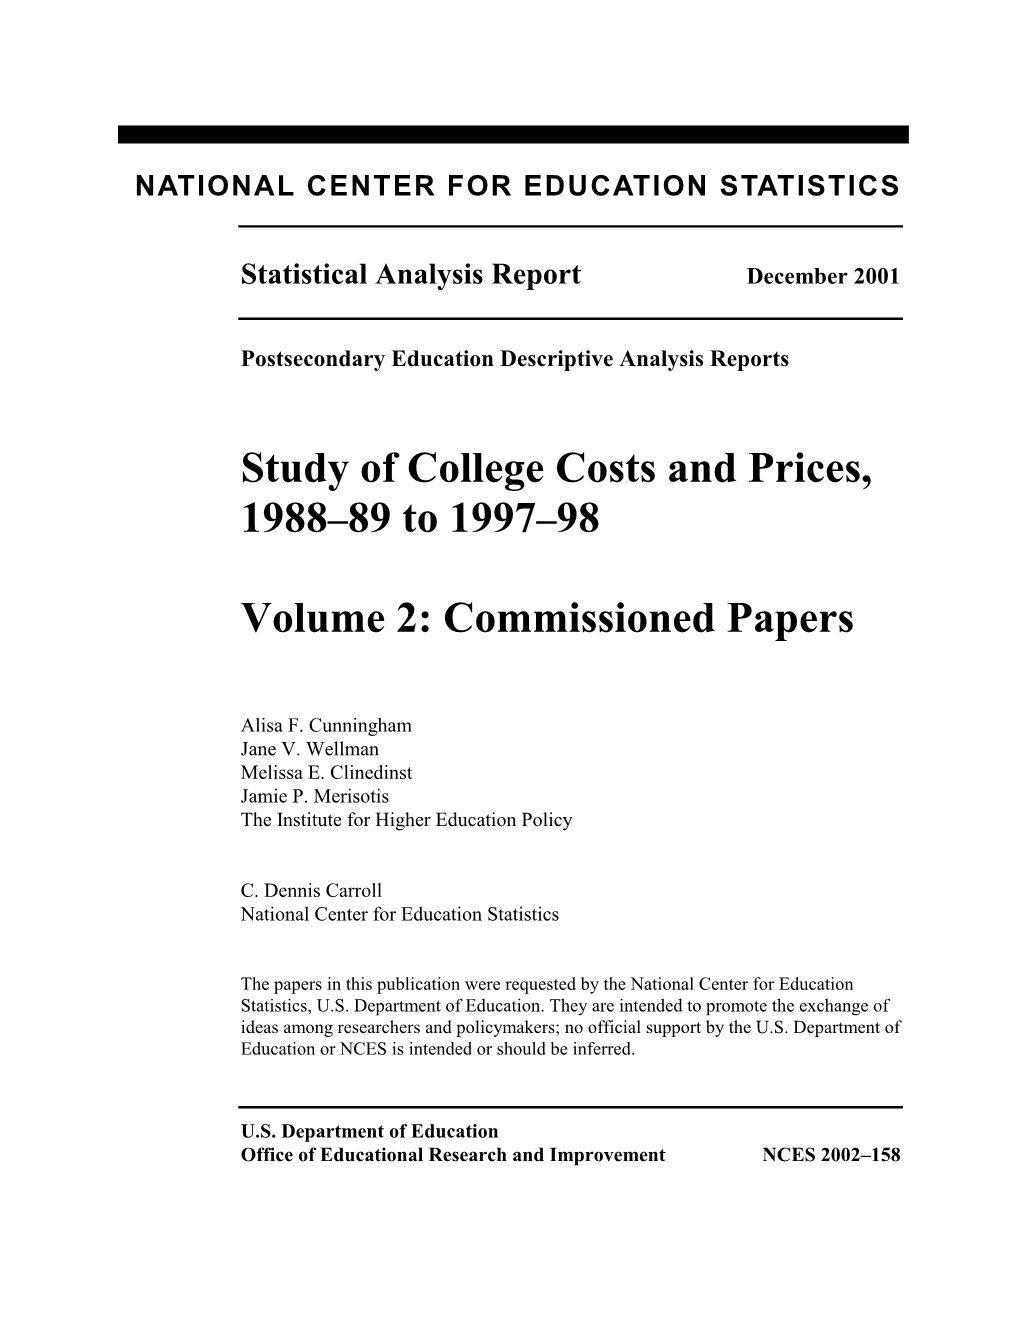 Study of College Costs and Prices, 1988-89 to 1997-98, Vol 2